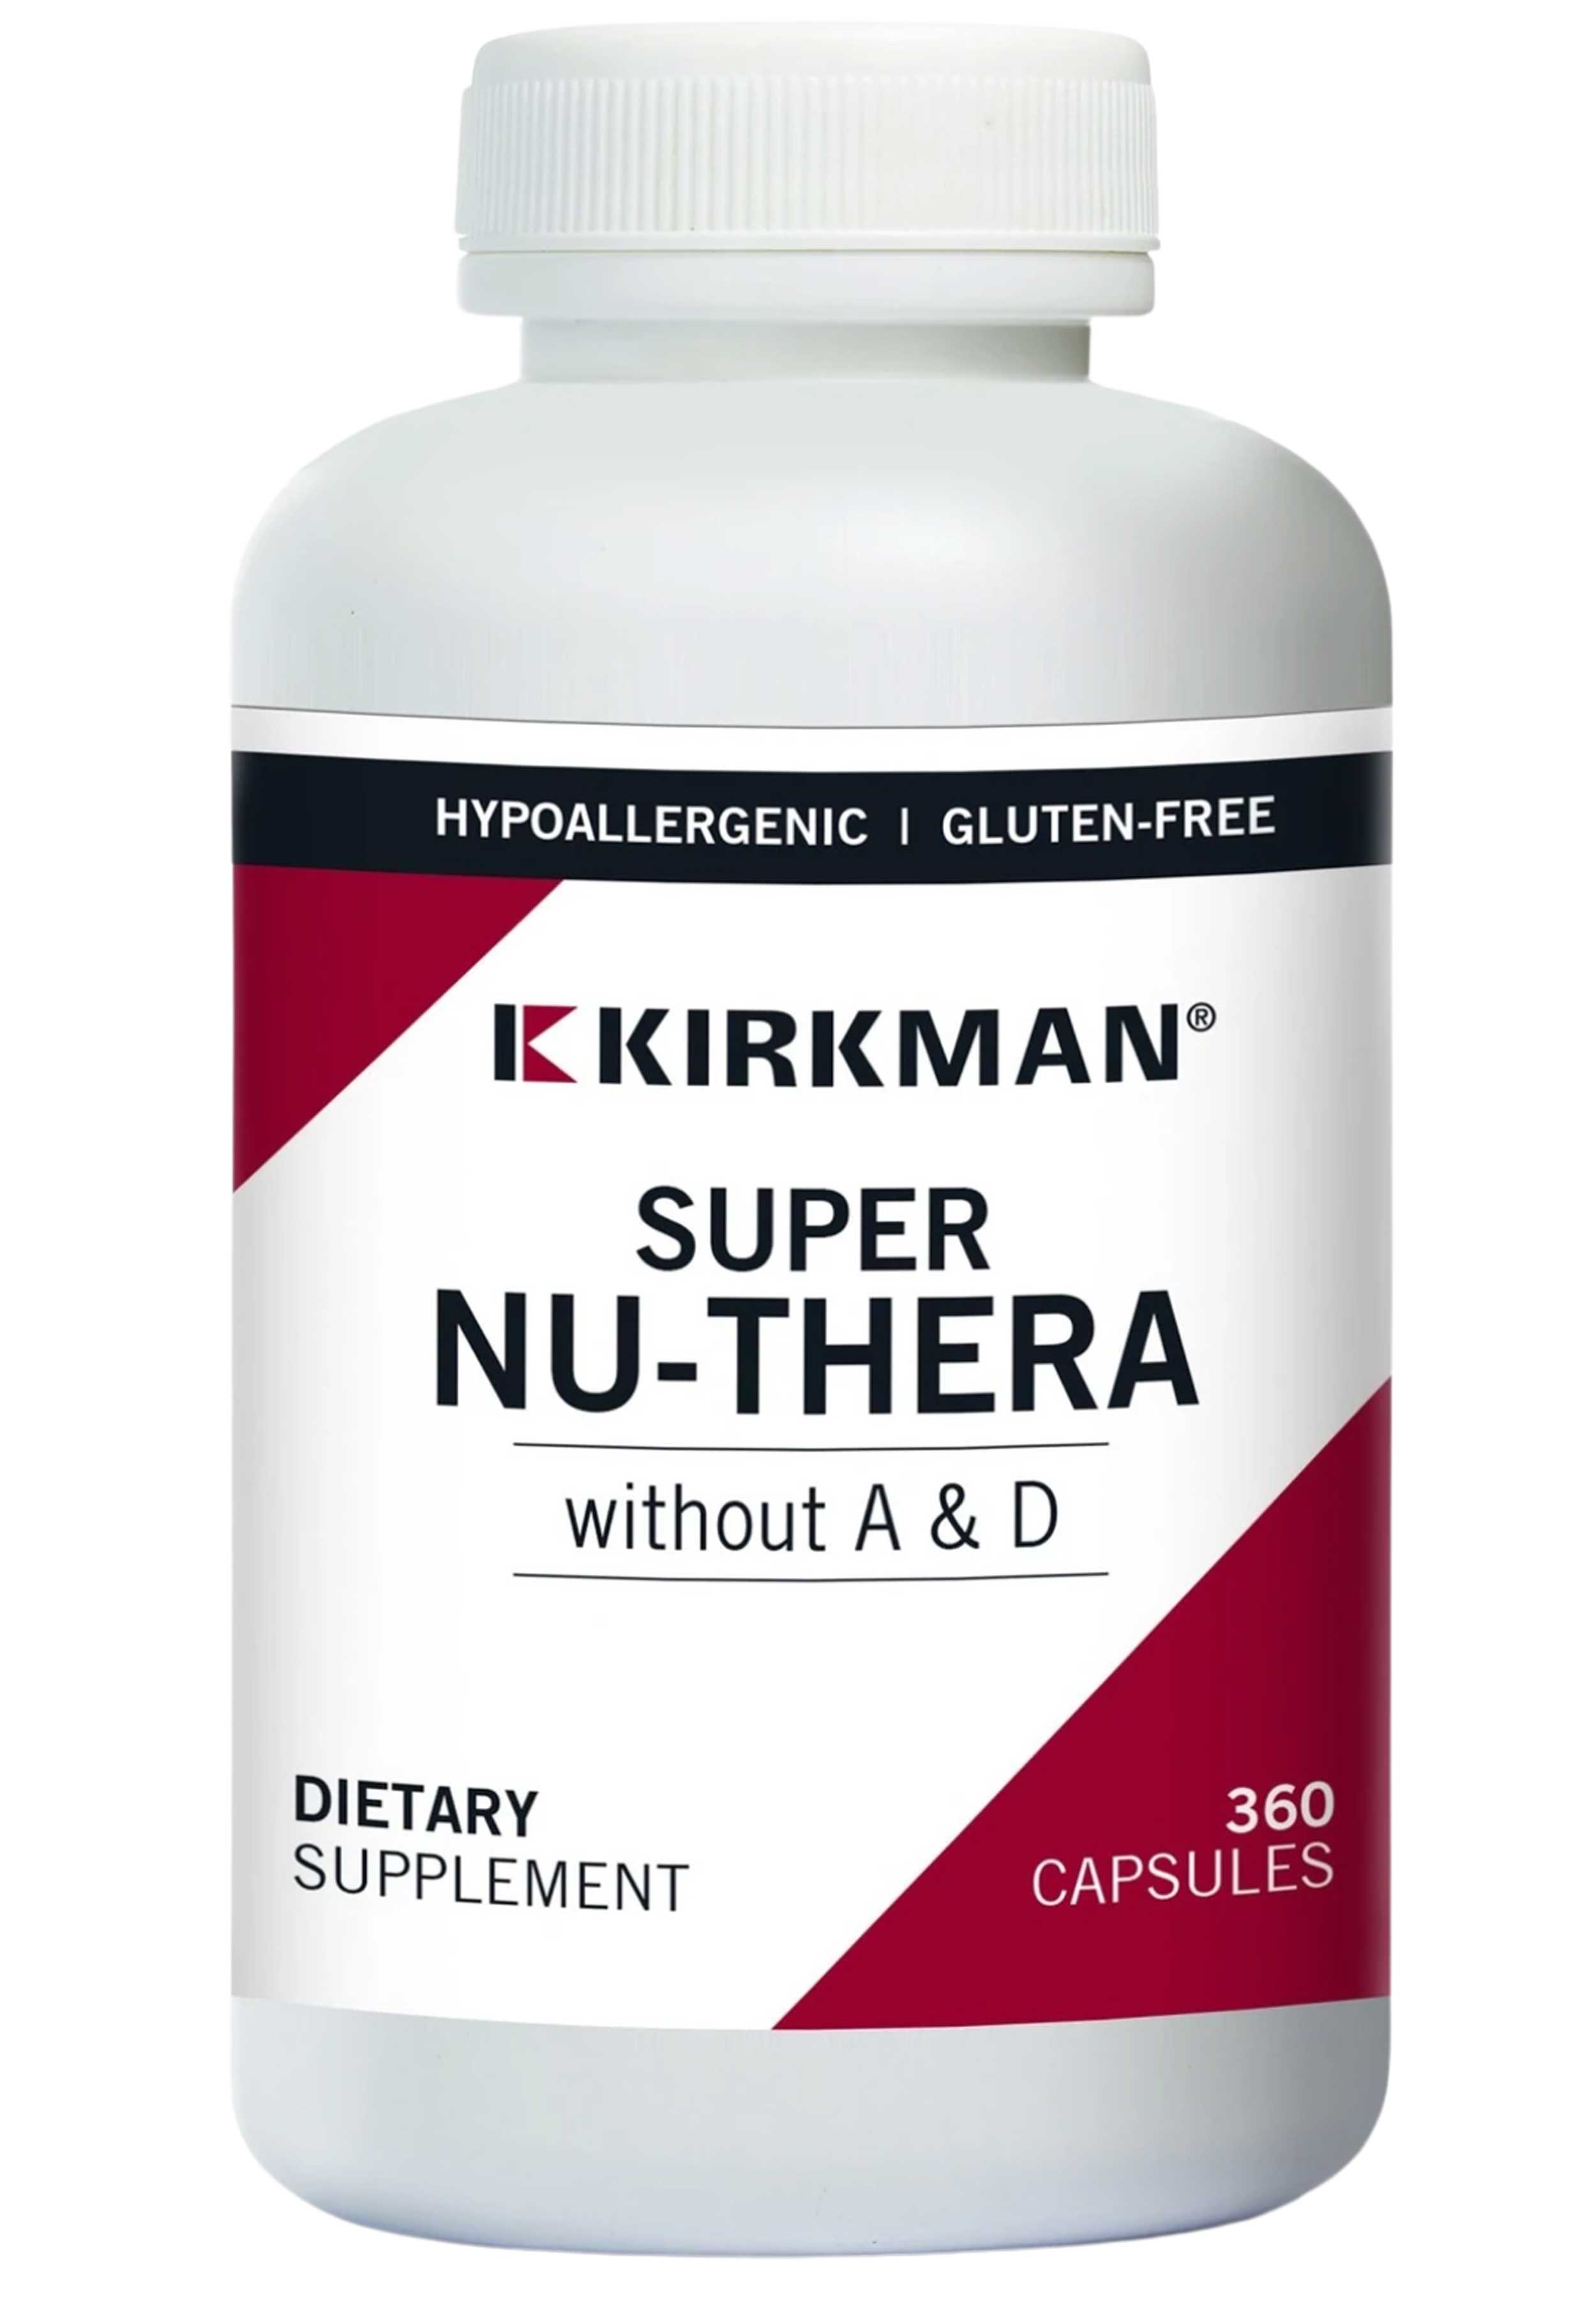 Kirkman Super Nu-Thera without A & D Capsules